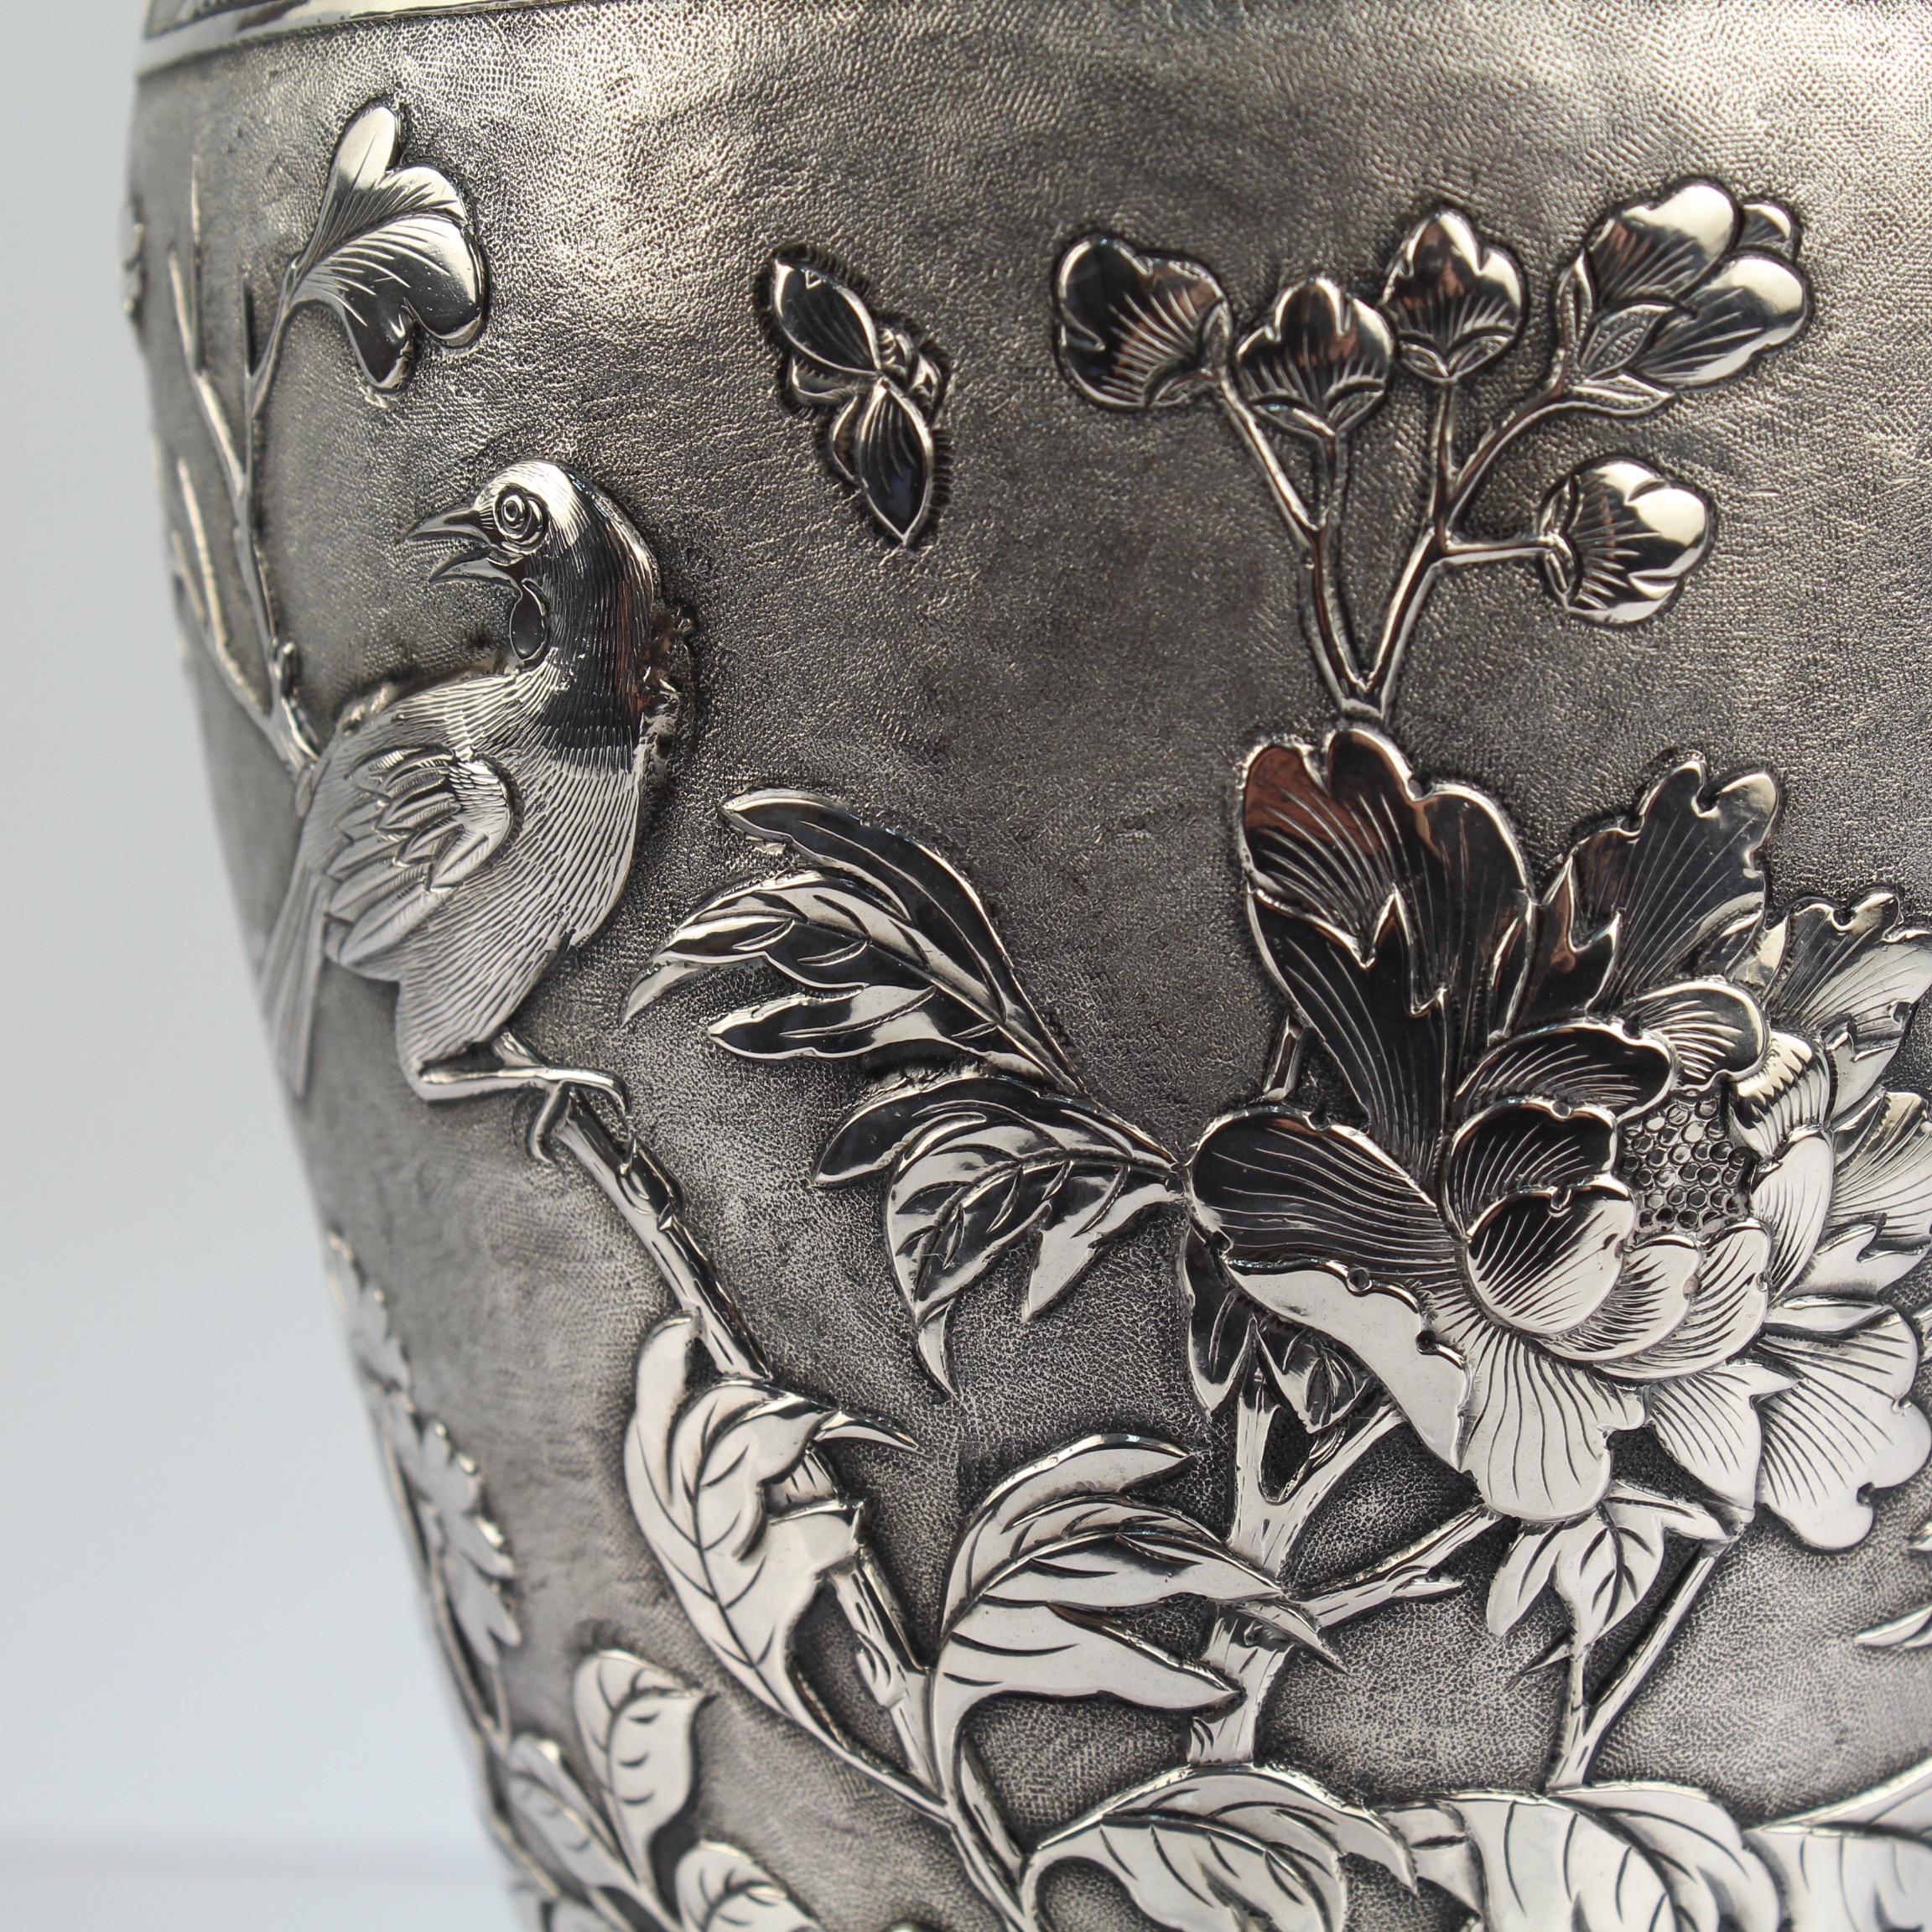 Antique Signed Chinese Export Sterling Silver Vase with Landscape and Figures For Sale 5